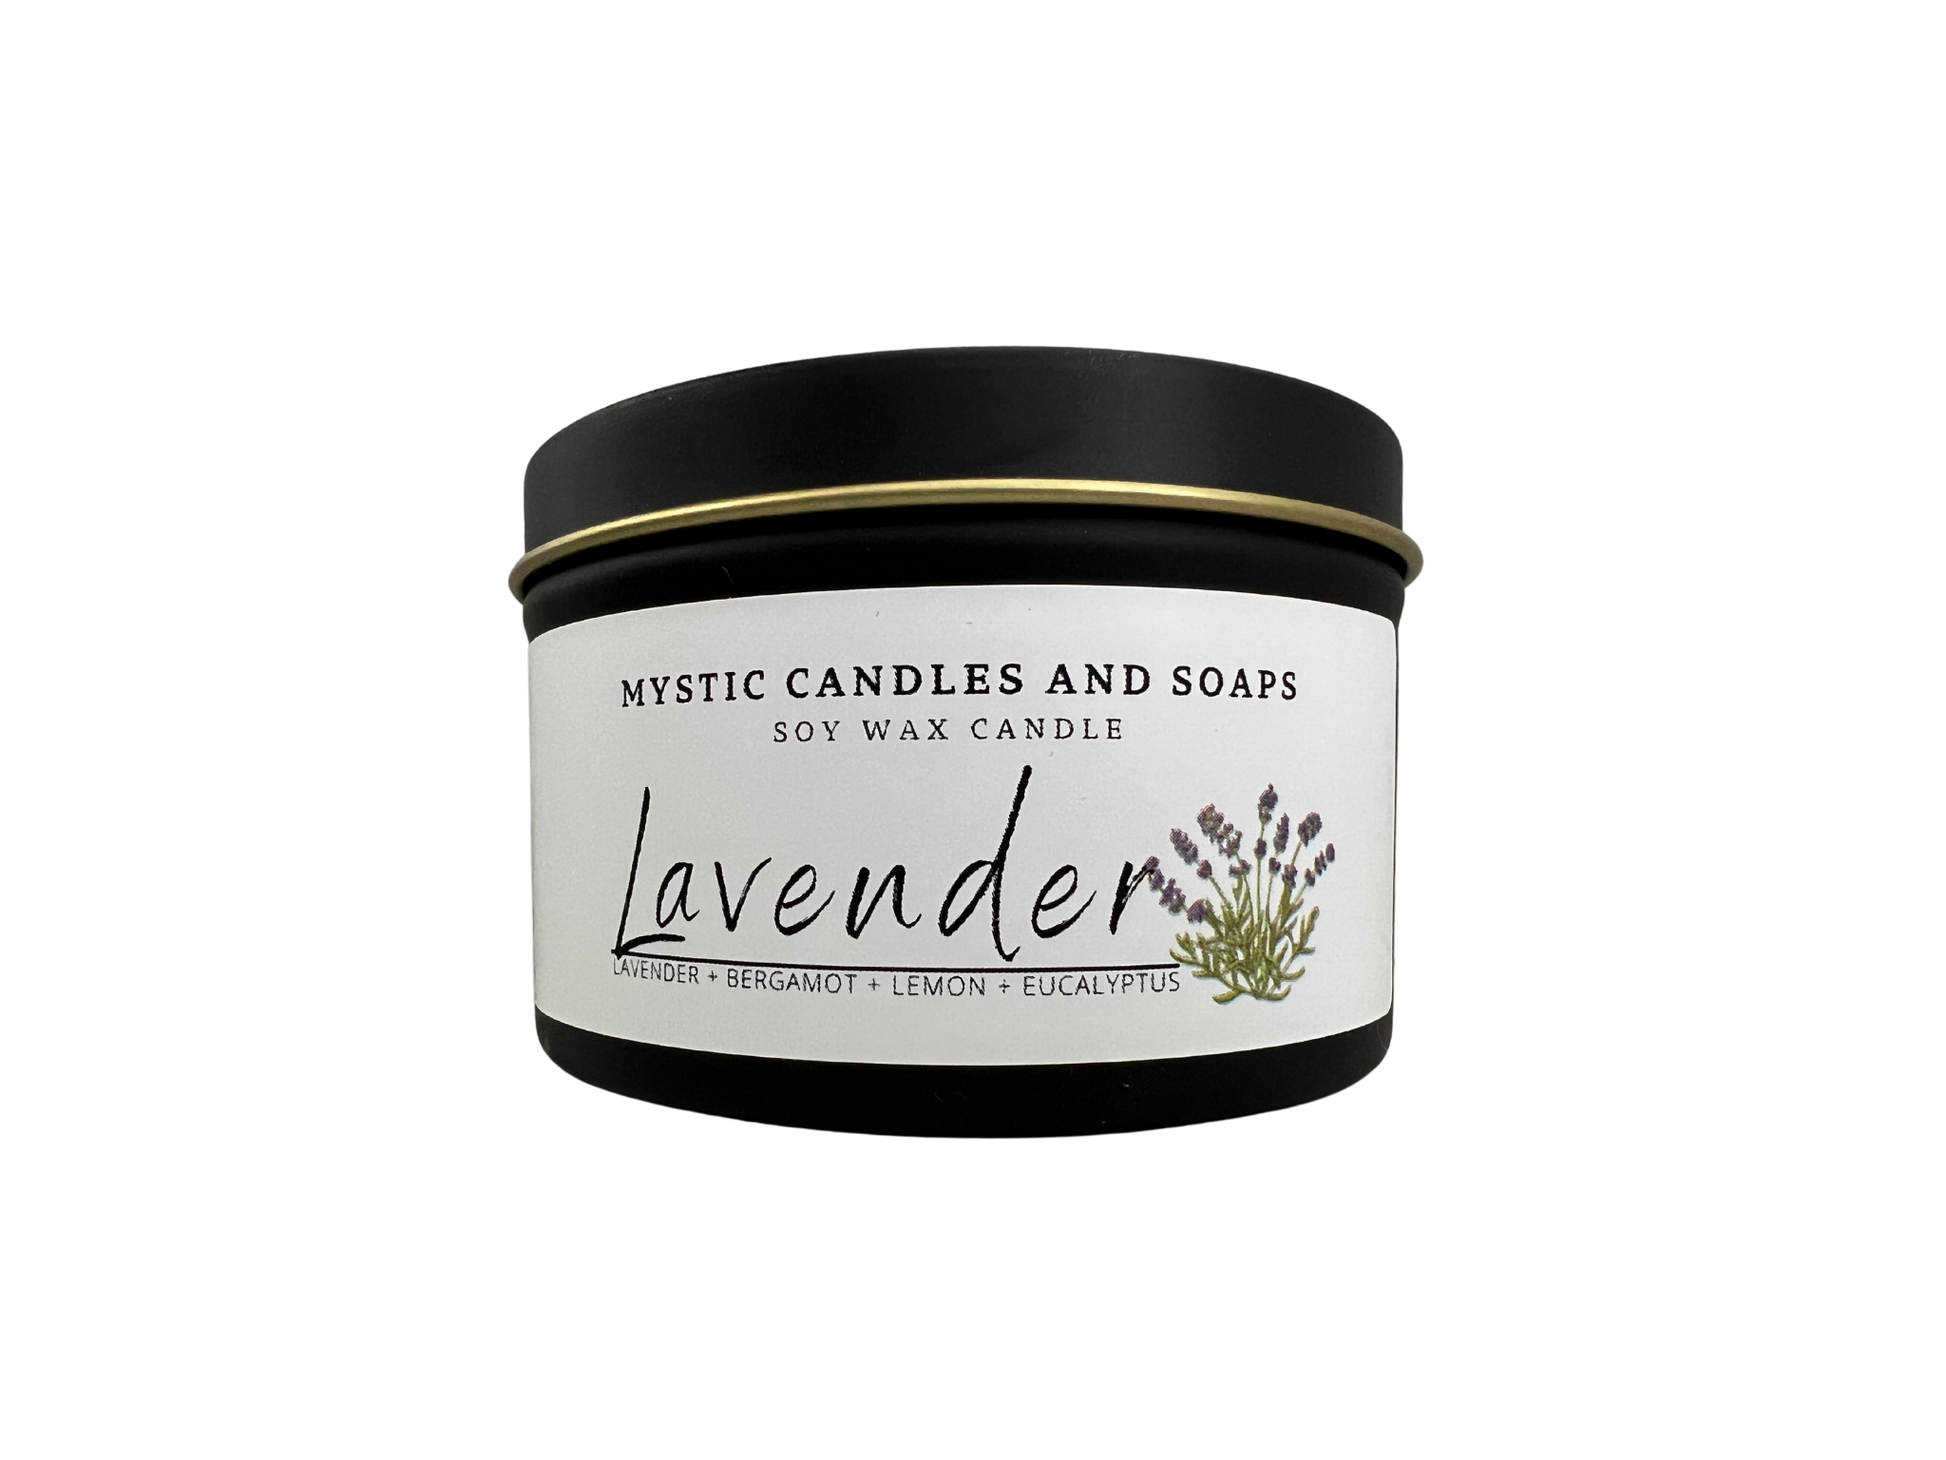 Lavender Flameless Candle - Mystic Candles and Soaps LLC